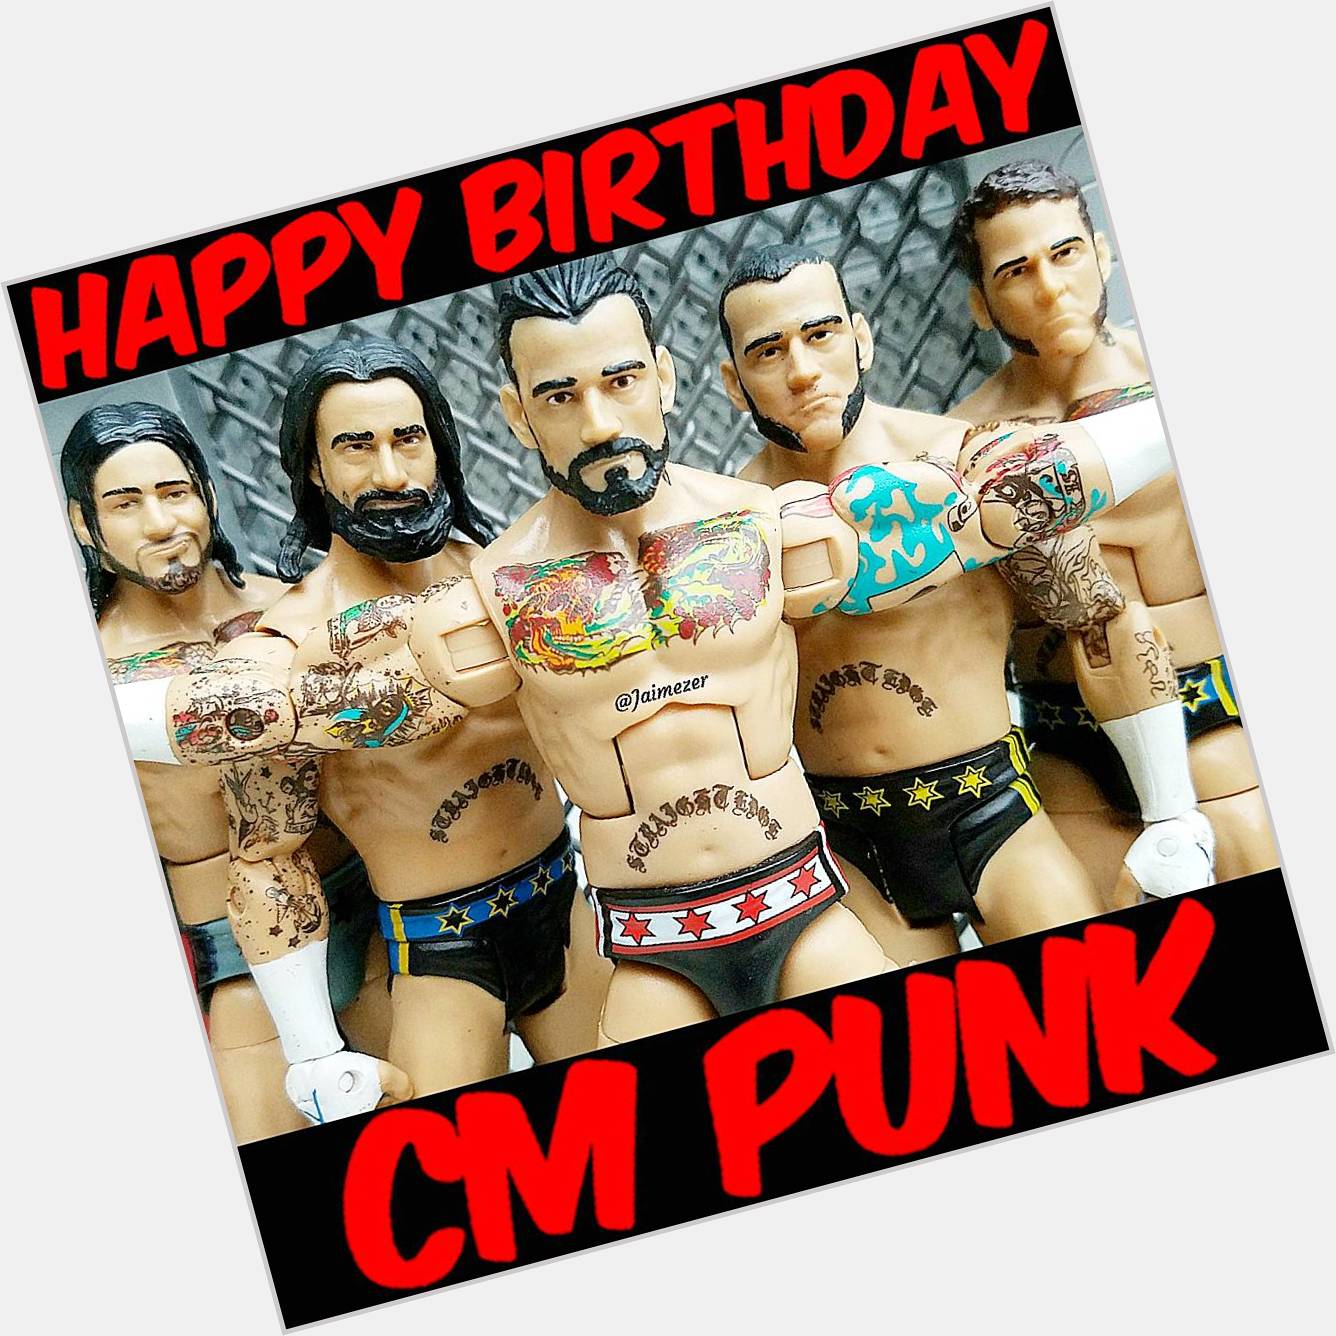 Happy Birthday to my favorite Wrestler of all time, CM PUNK!   